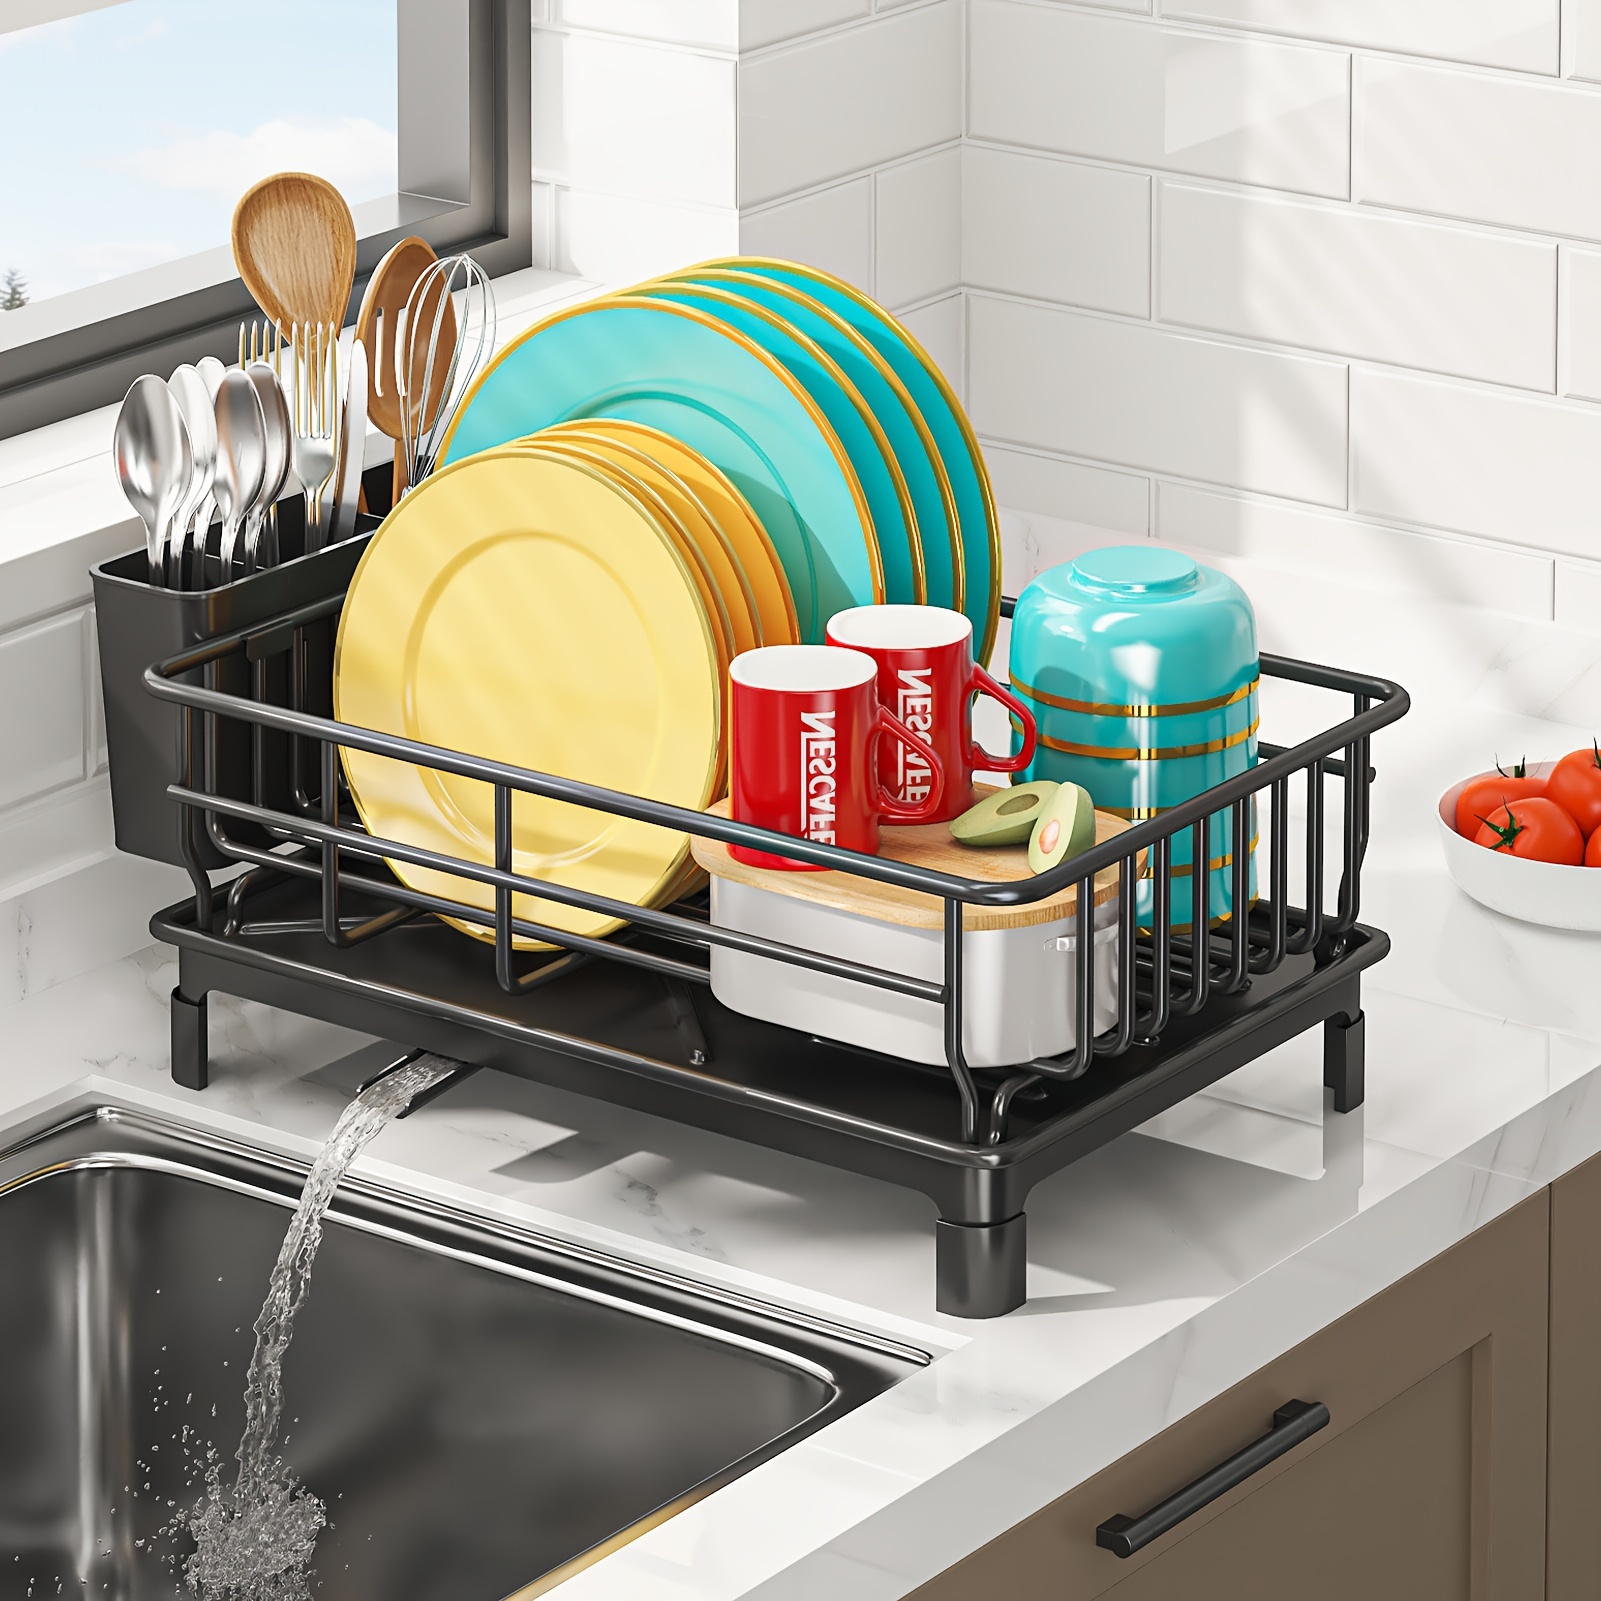 

Dish Drying Rack With Drainboard Dish Drainers For Kitchen Counter Sink Adjustable Spout, In Sink Dish Strainers With Utensil Holder And Knife Slots, Black